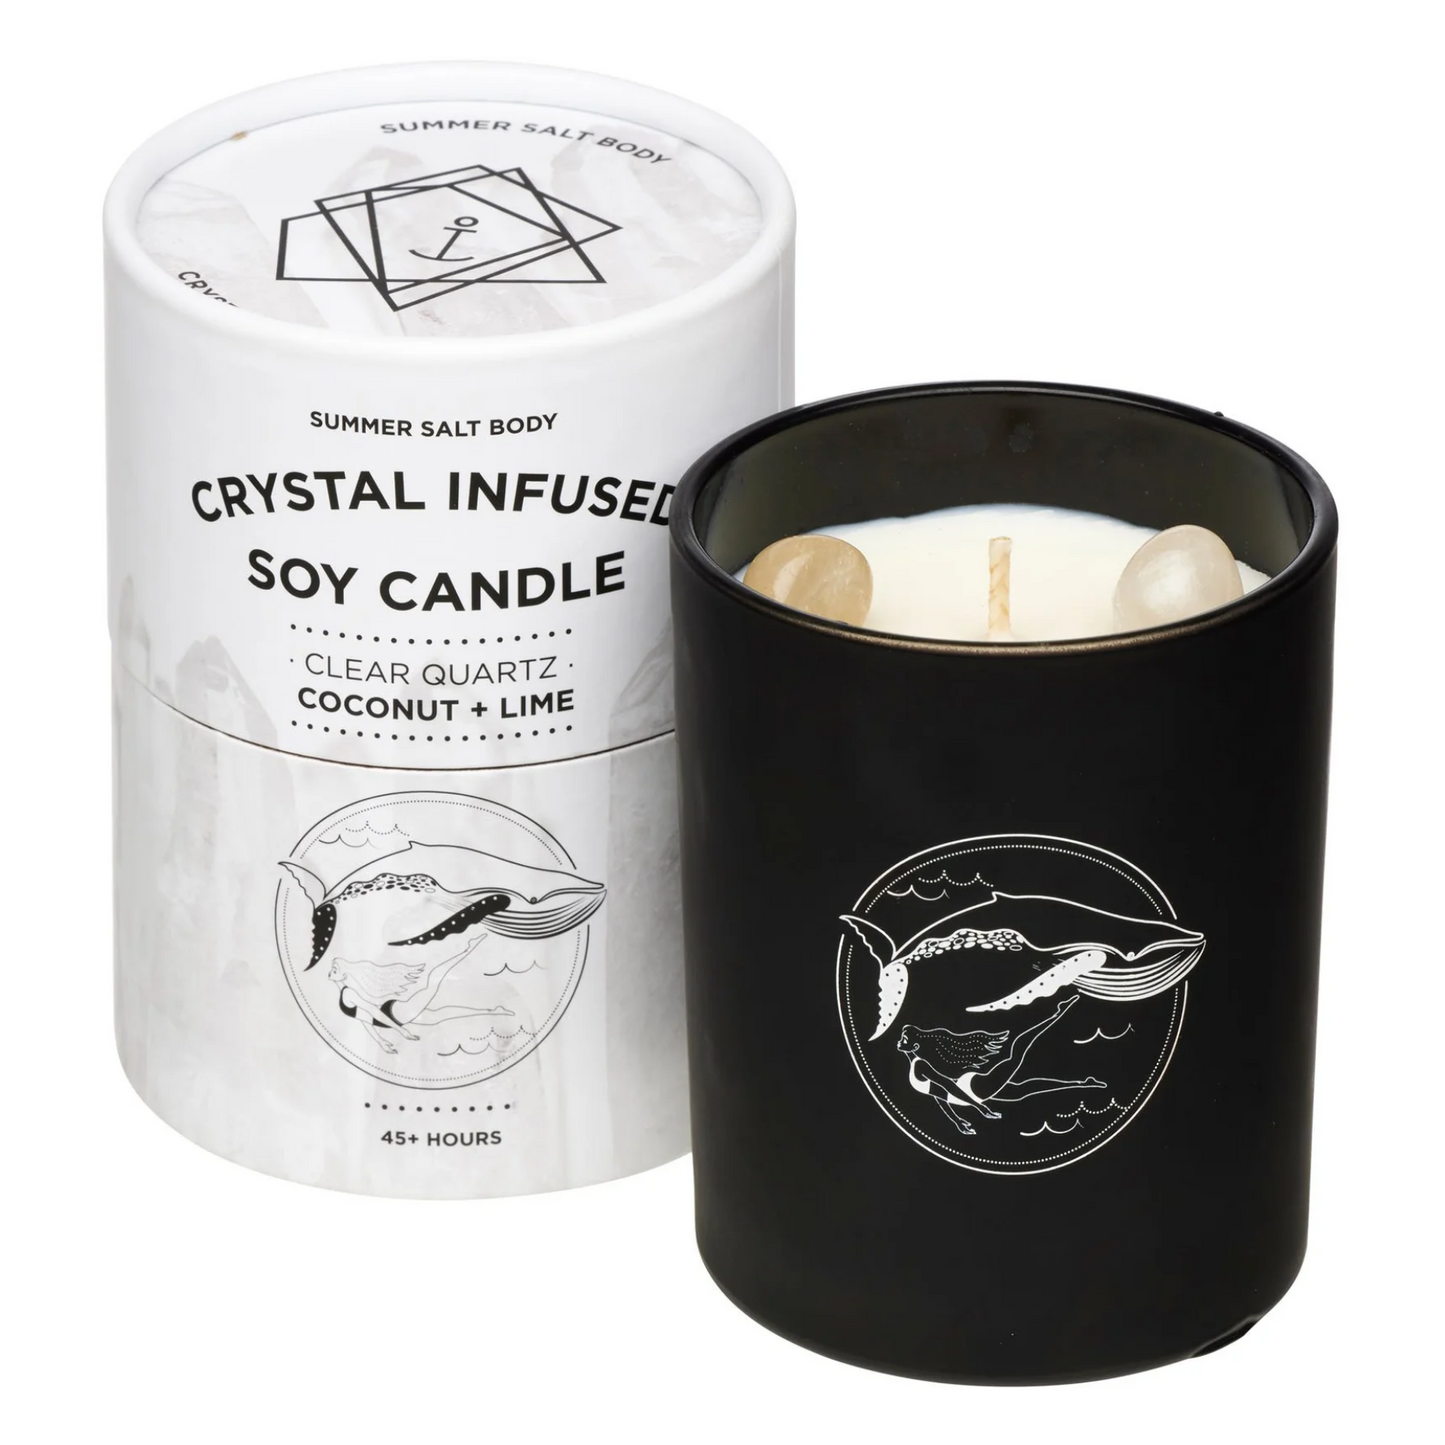 Summer Salt Body Crystal Infused Soy Candle, Clear Quartz X Coconut & Lime Fragrance